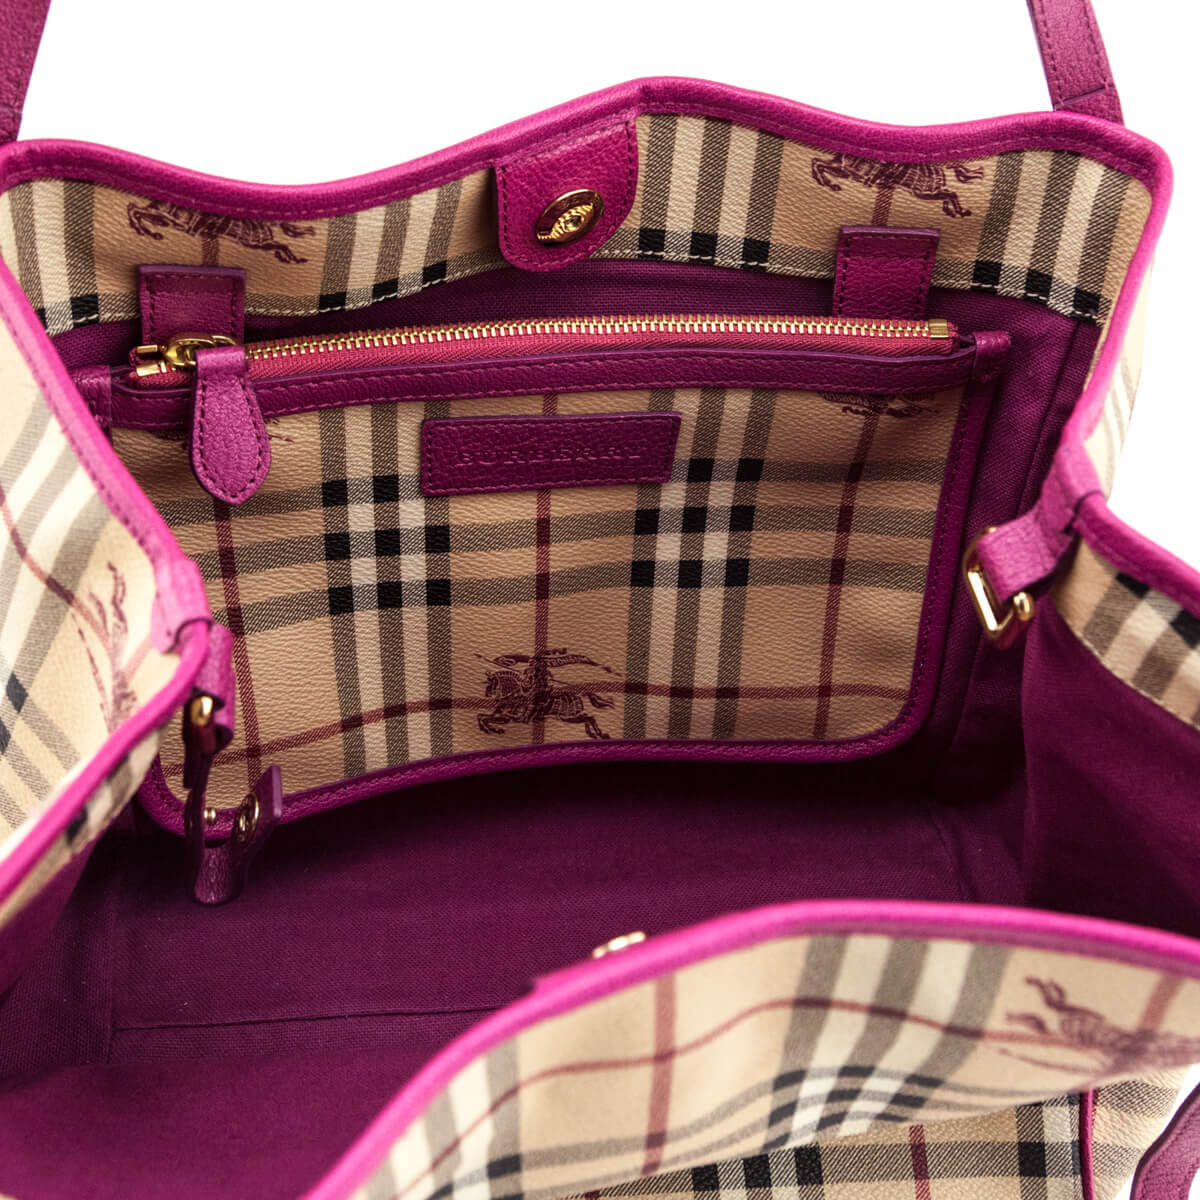 Ll Mn Freya Ll6 Tote Bag - Burberry - Brght Red/Dusky Pink - Cotton  Multiple colors Cloth ref.794569 - Joli Closet